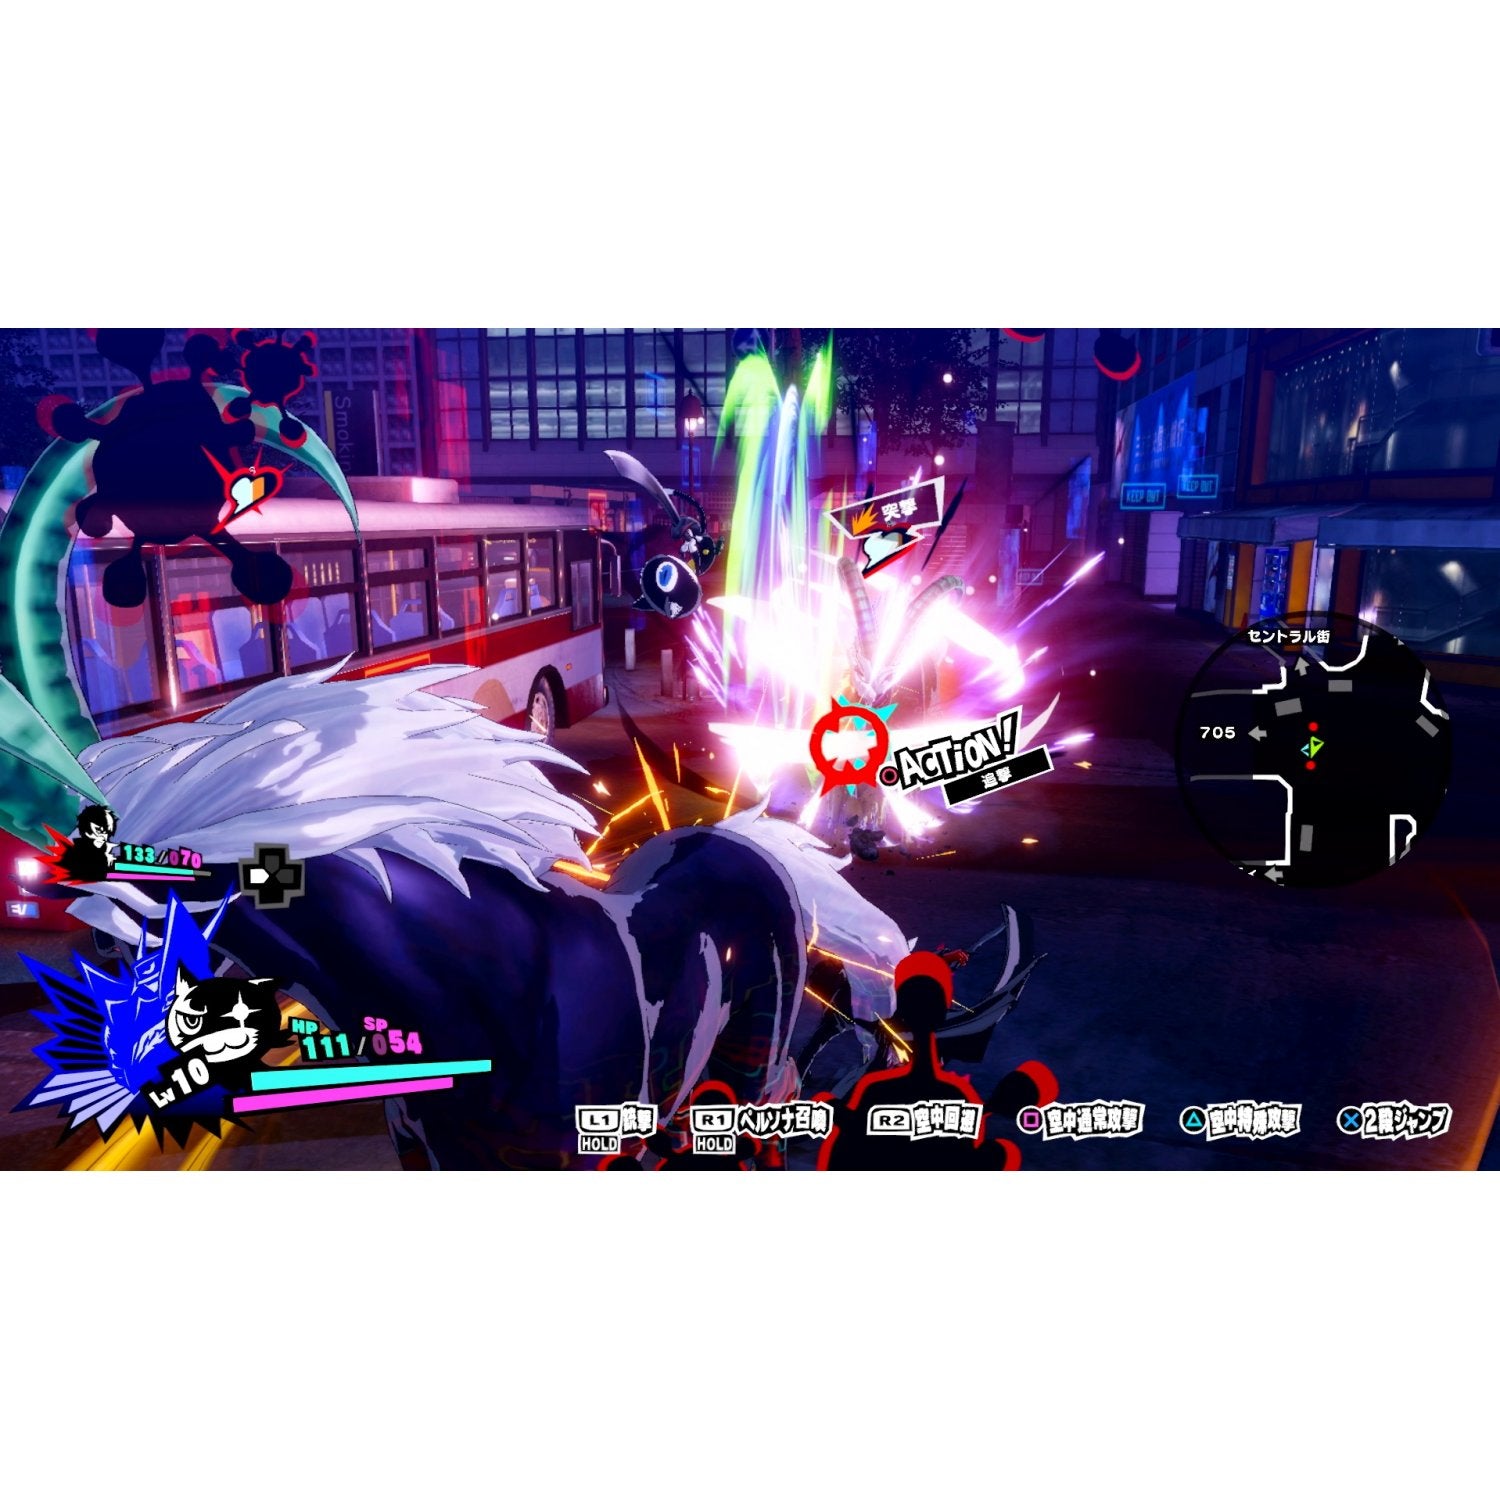 NSW P5S: Persona 5 Strikers (NC16)